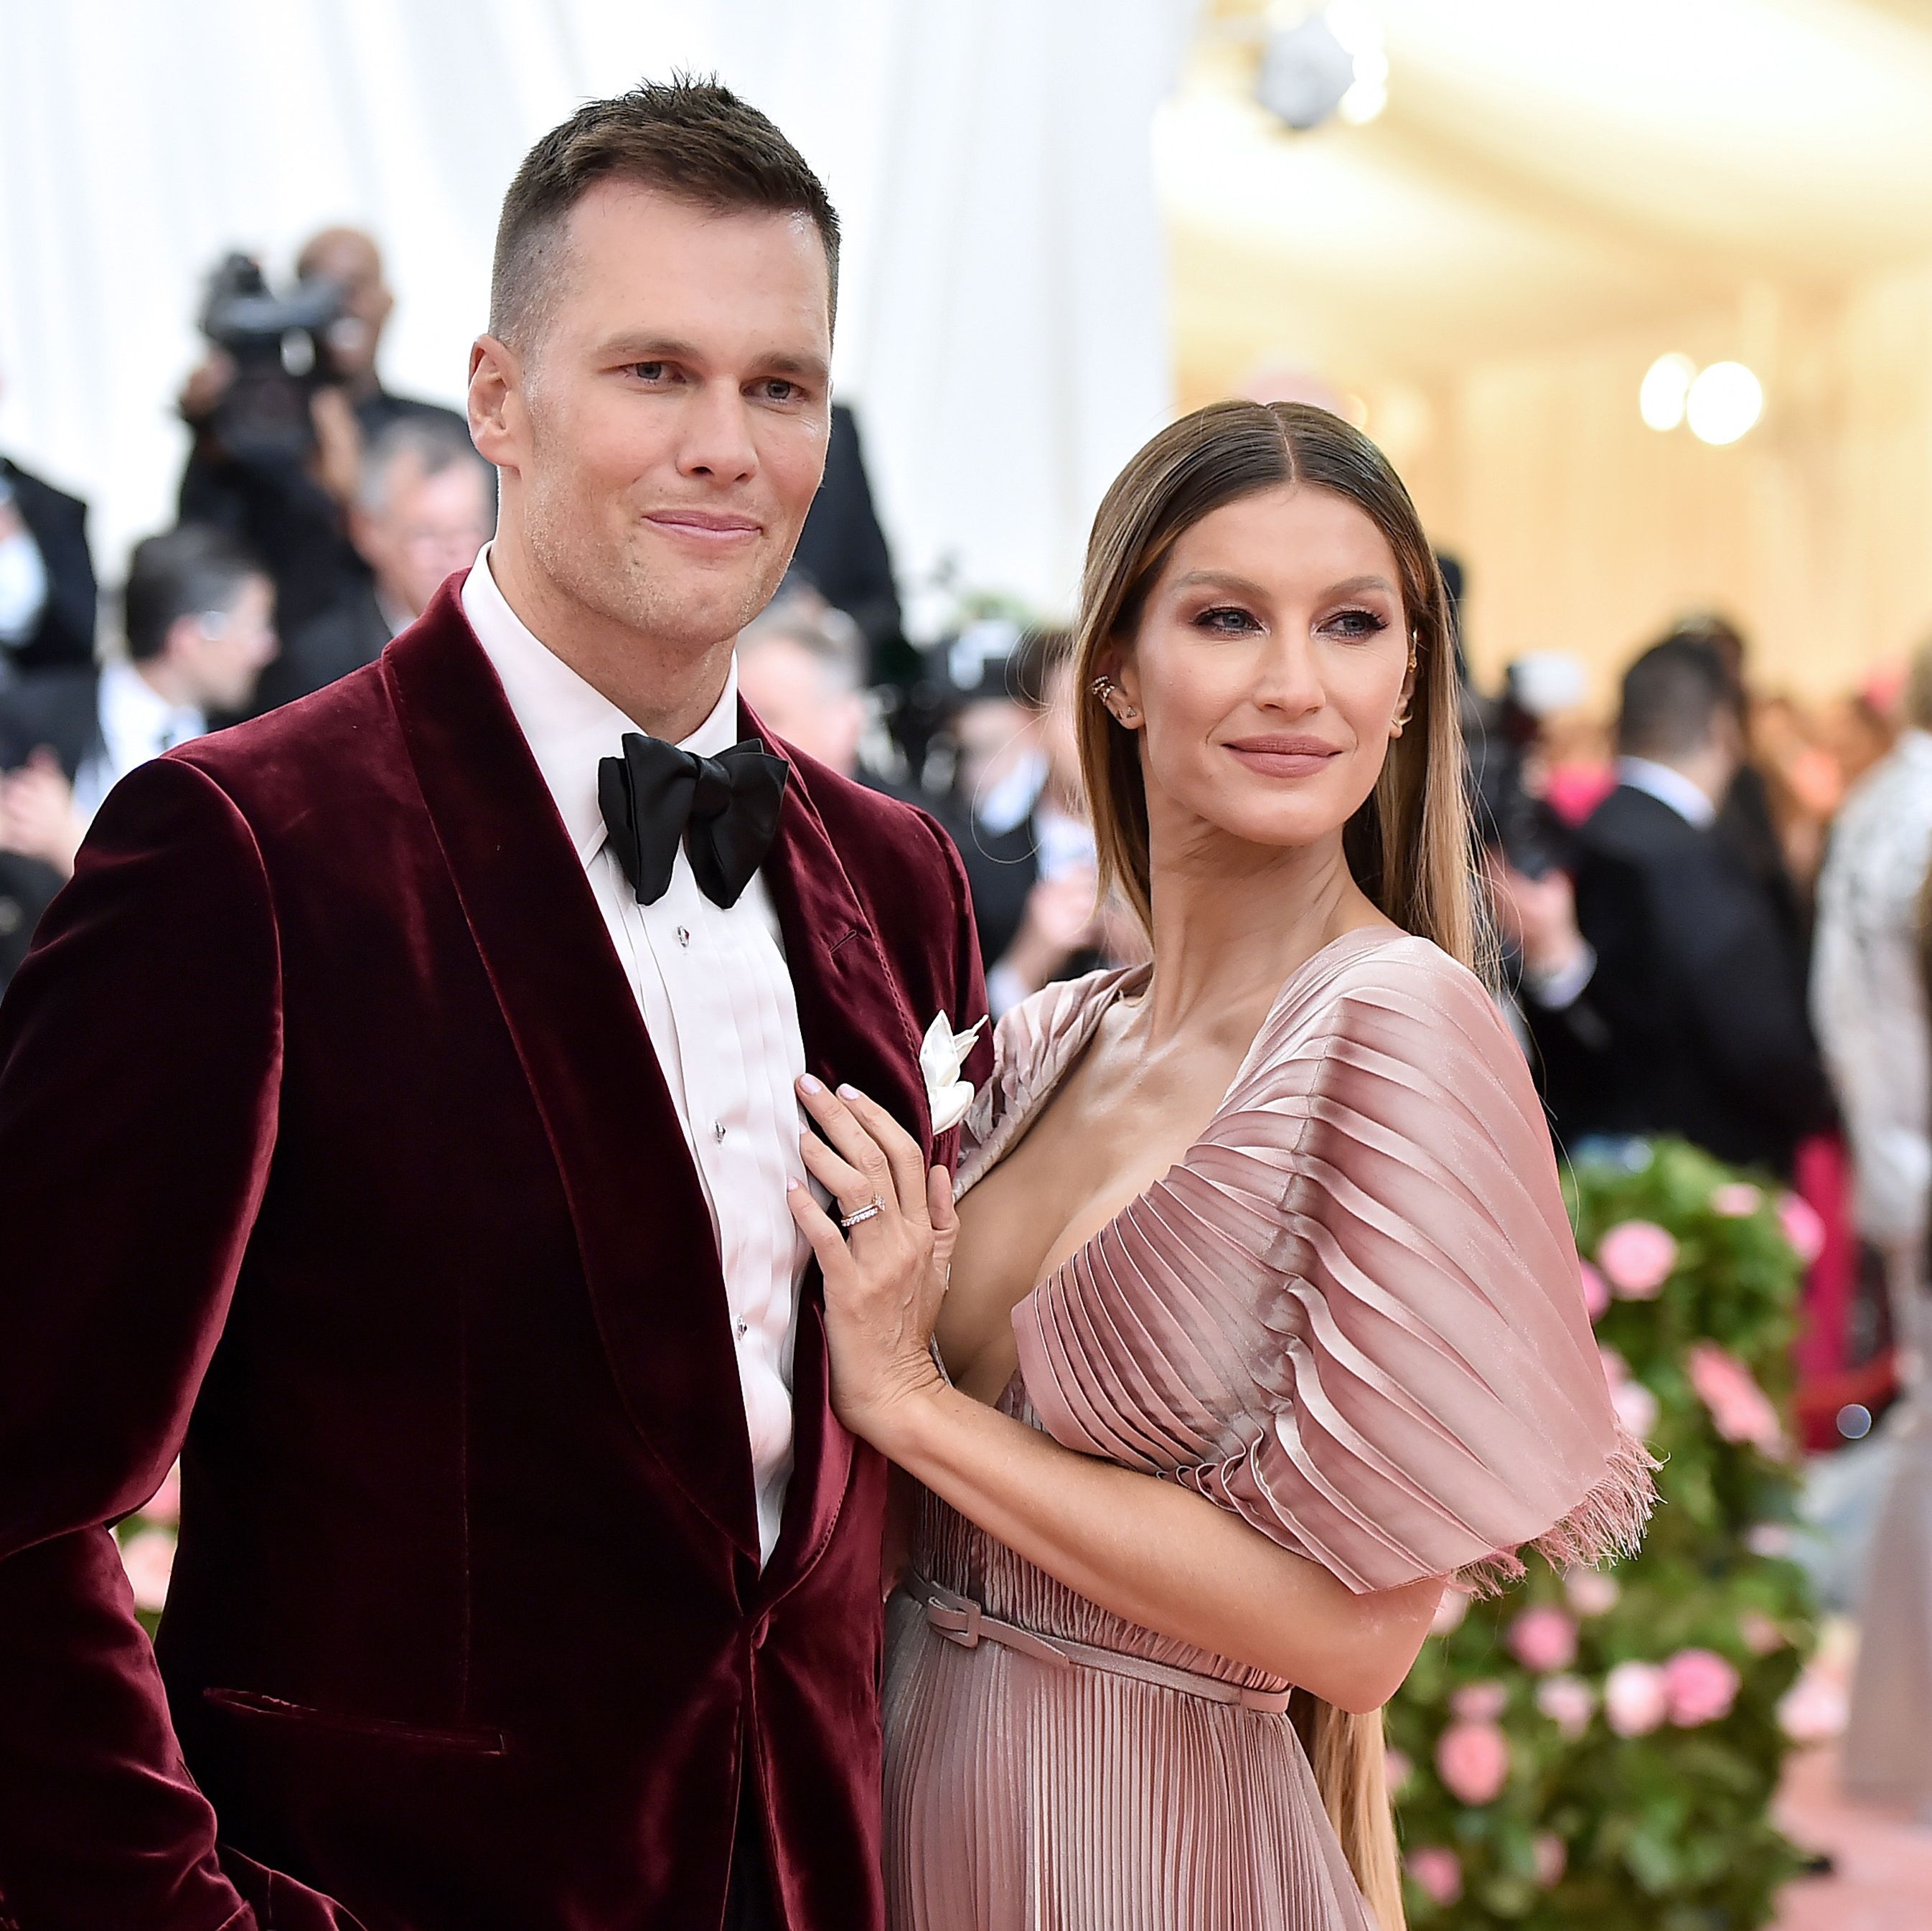 Attn: Gisele Bündchen Has Reportedly Hired Divorce Lawyers